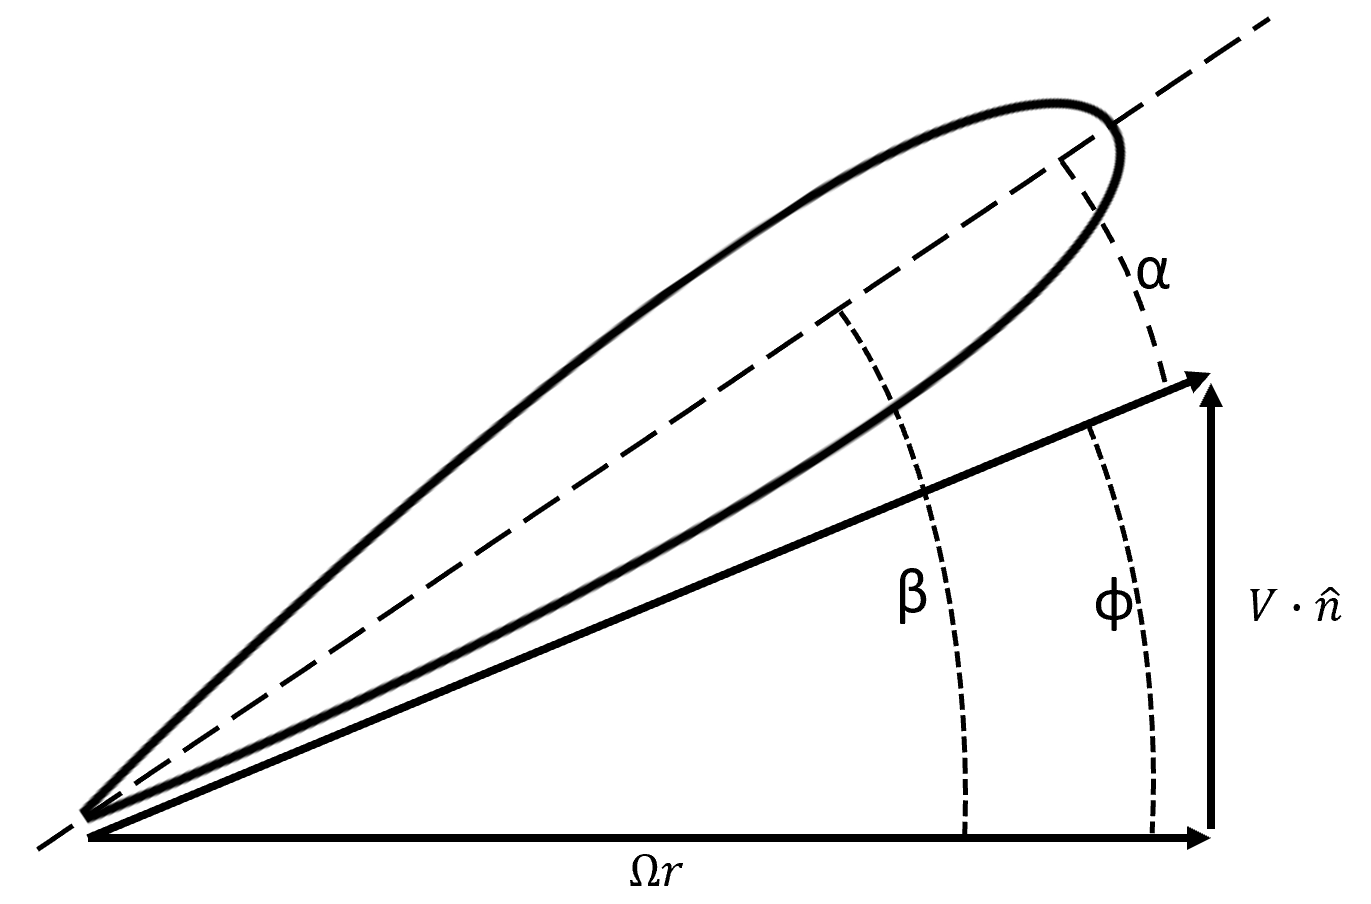 An illustration of a blade airfoil section